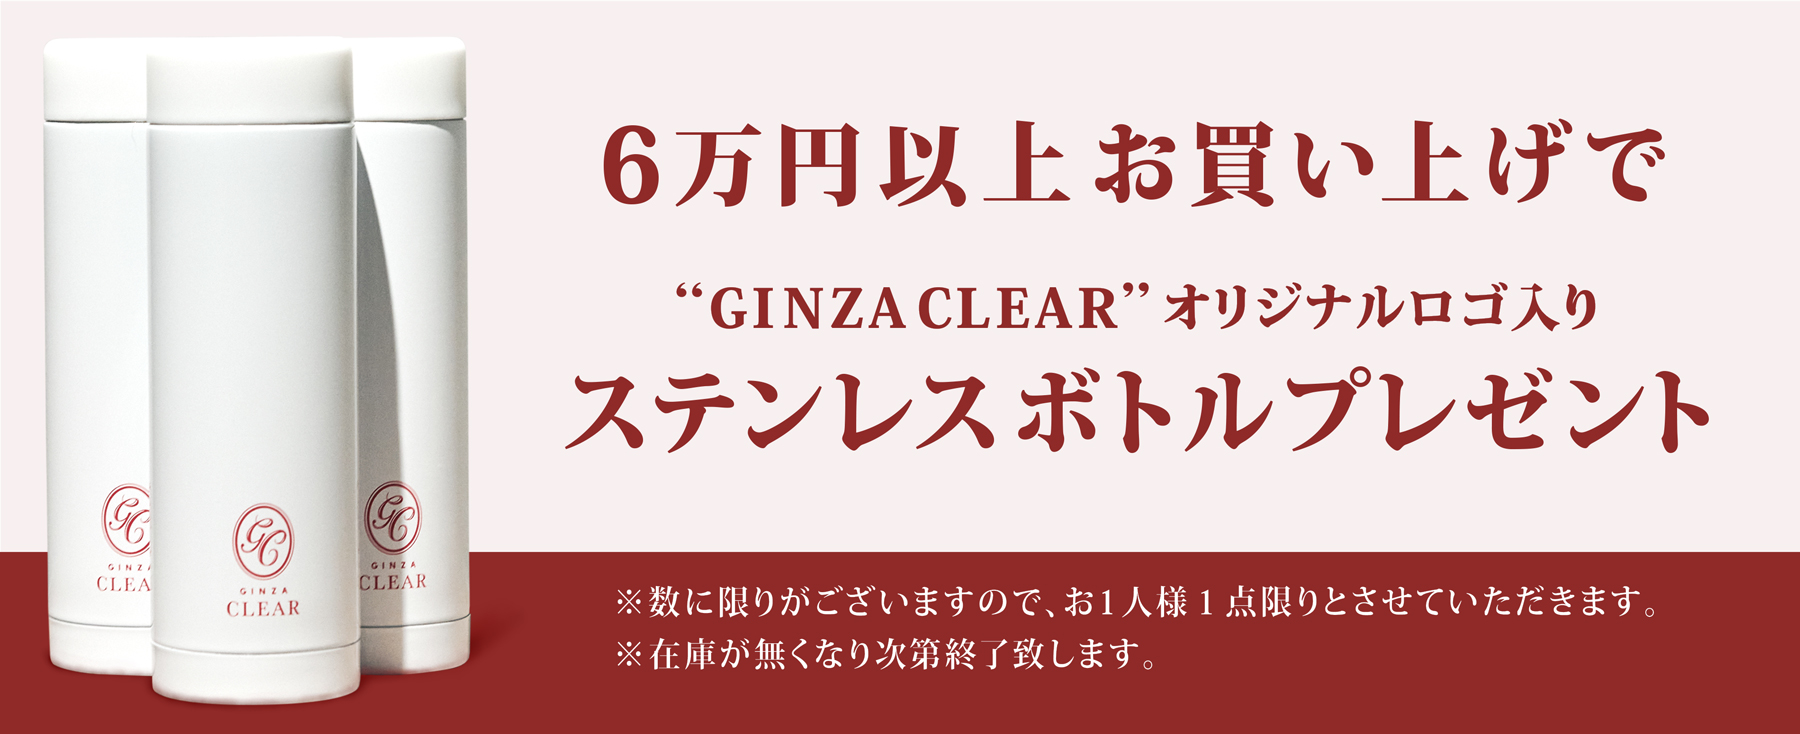 Ginza_clear_campaign_img